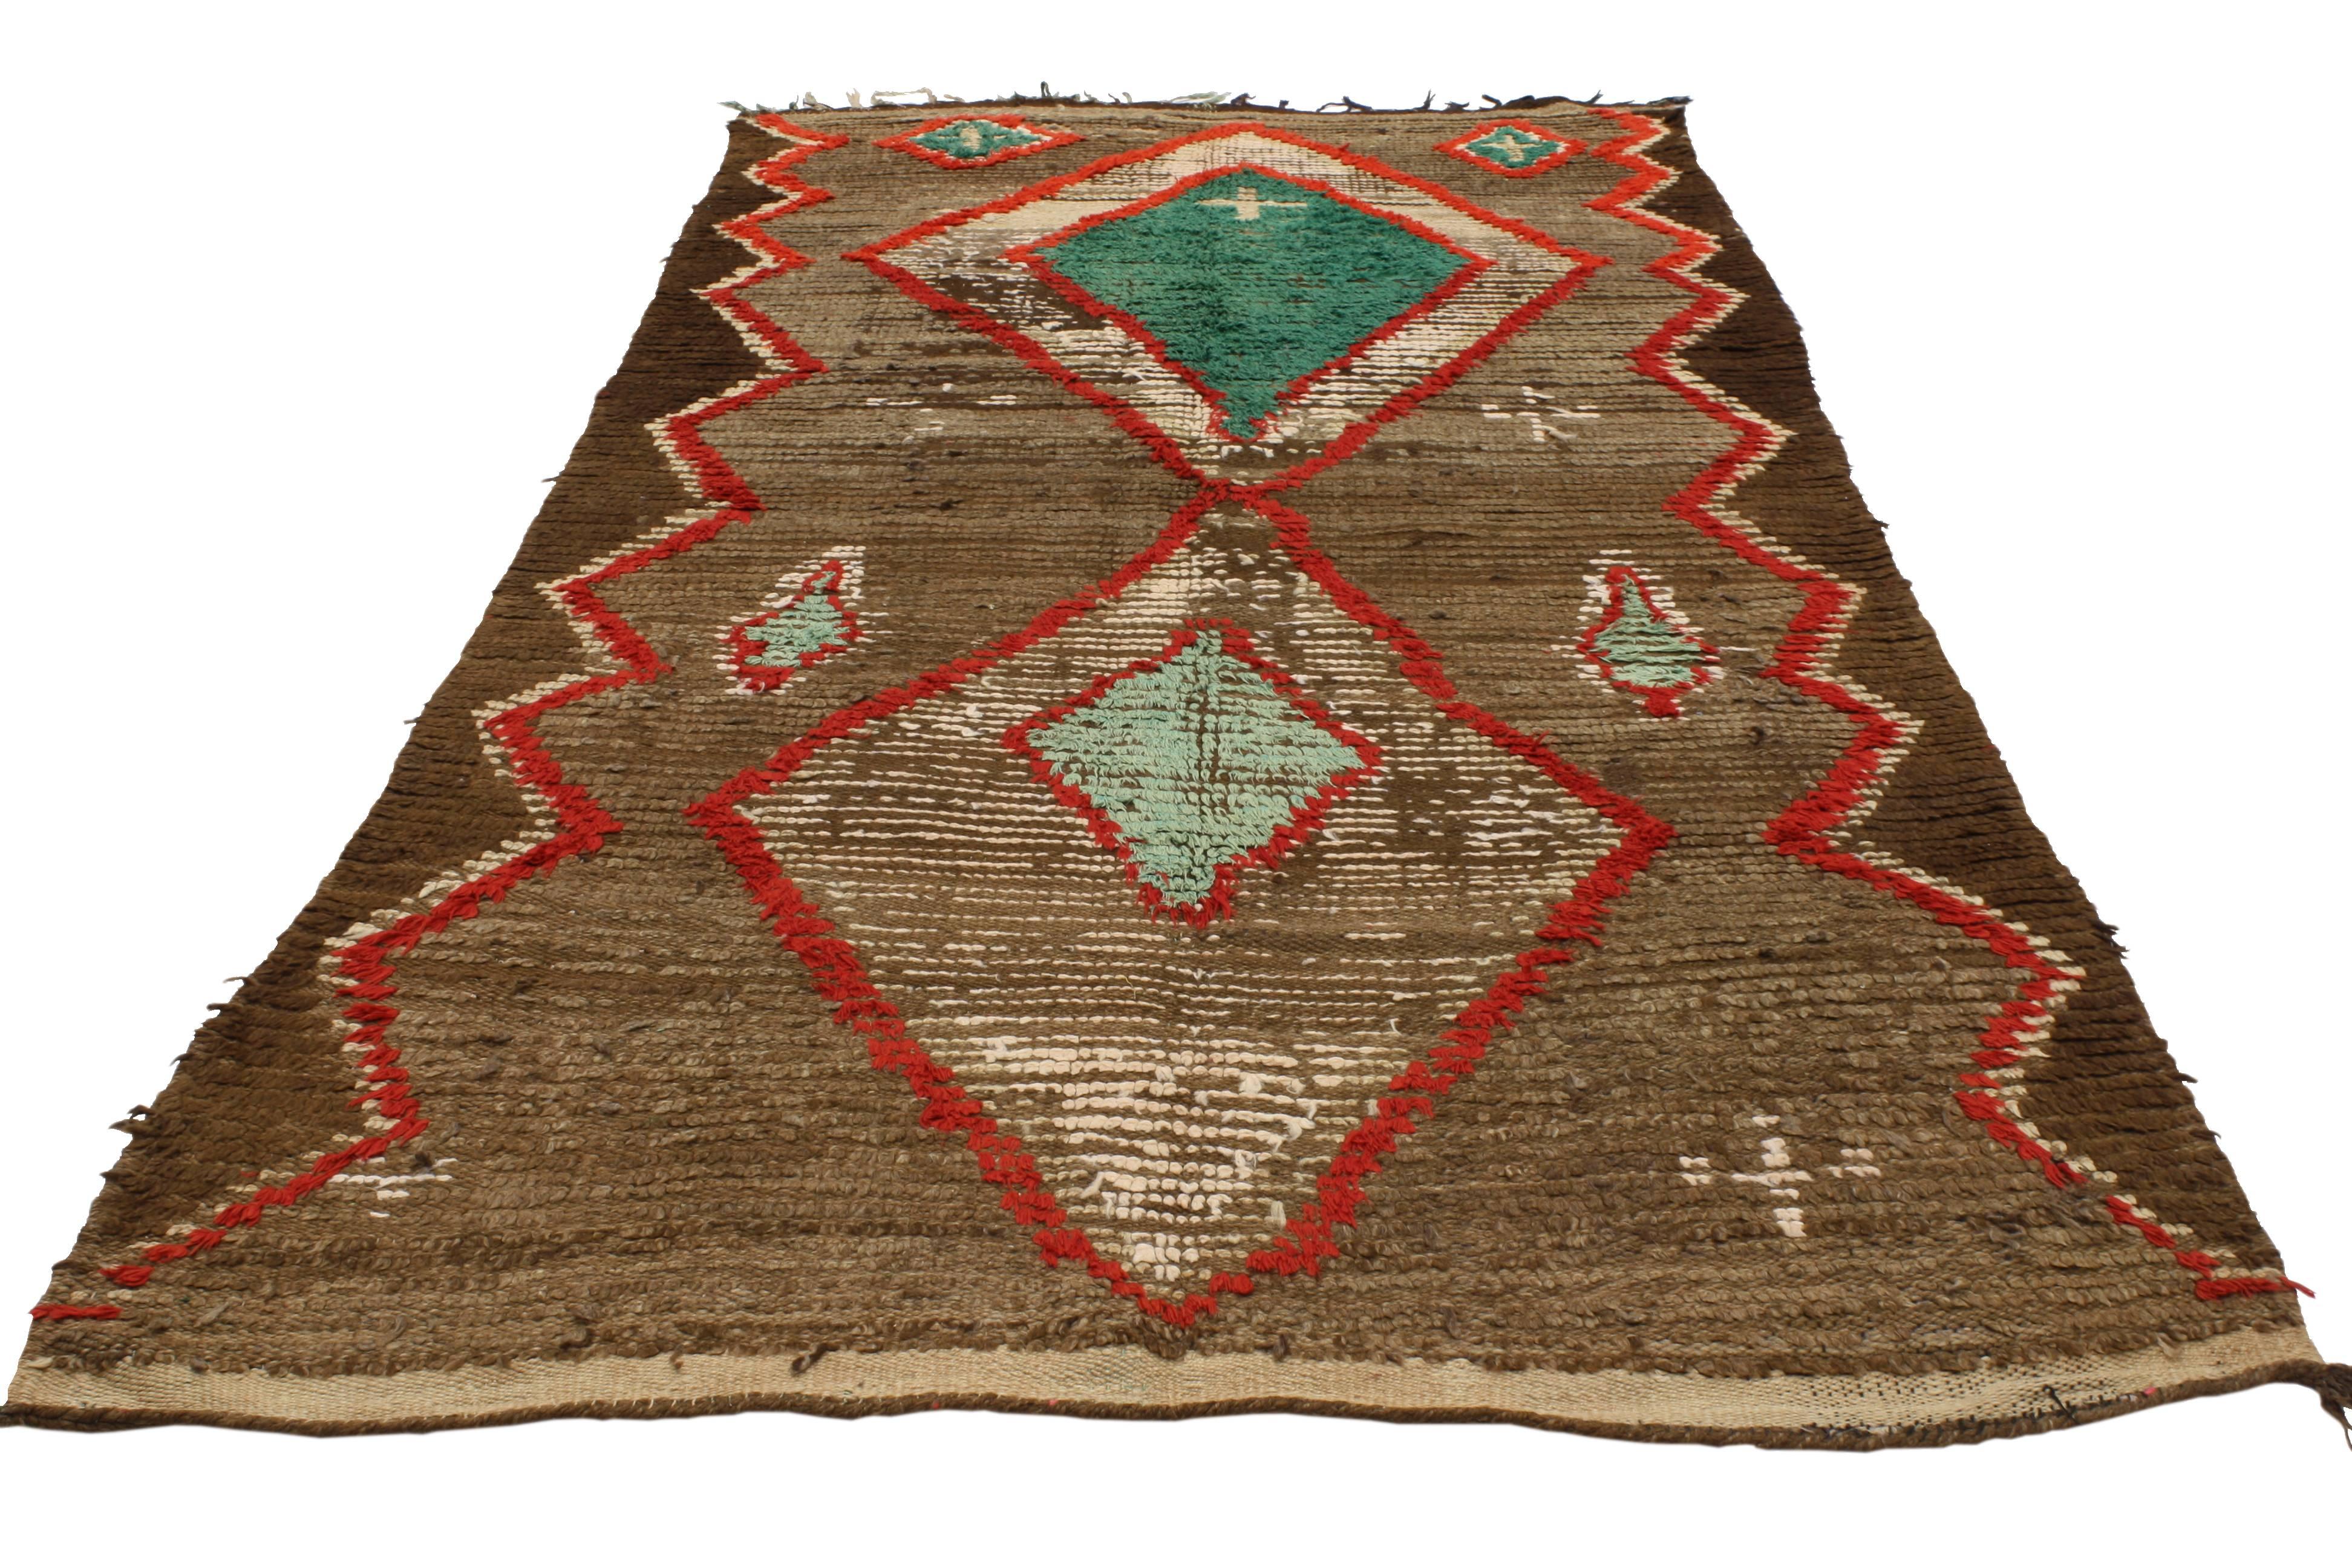 Tribal Vintage Berber Moroccan Rug with Mid-Century Modern Style